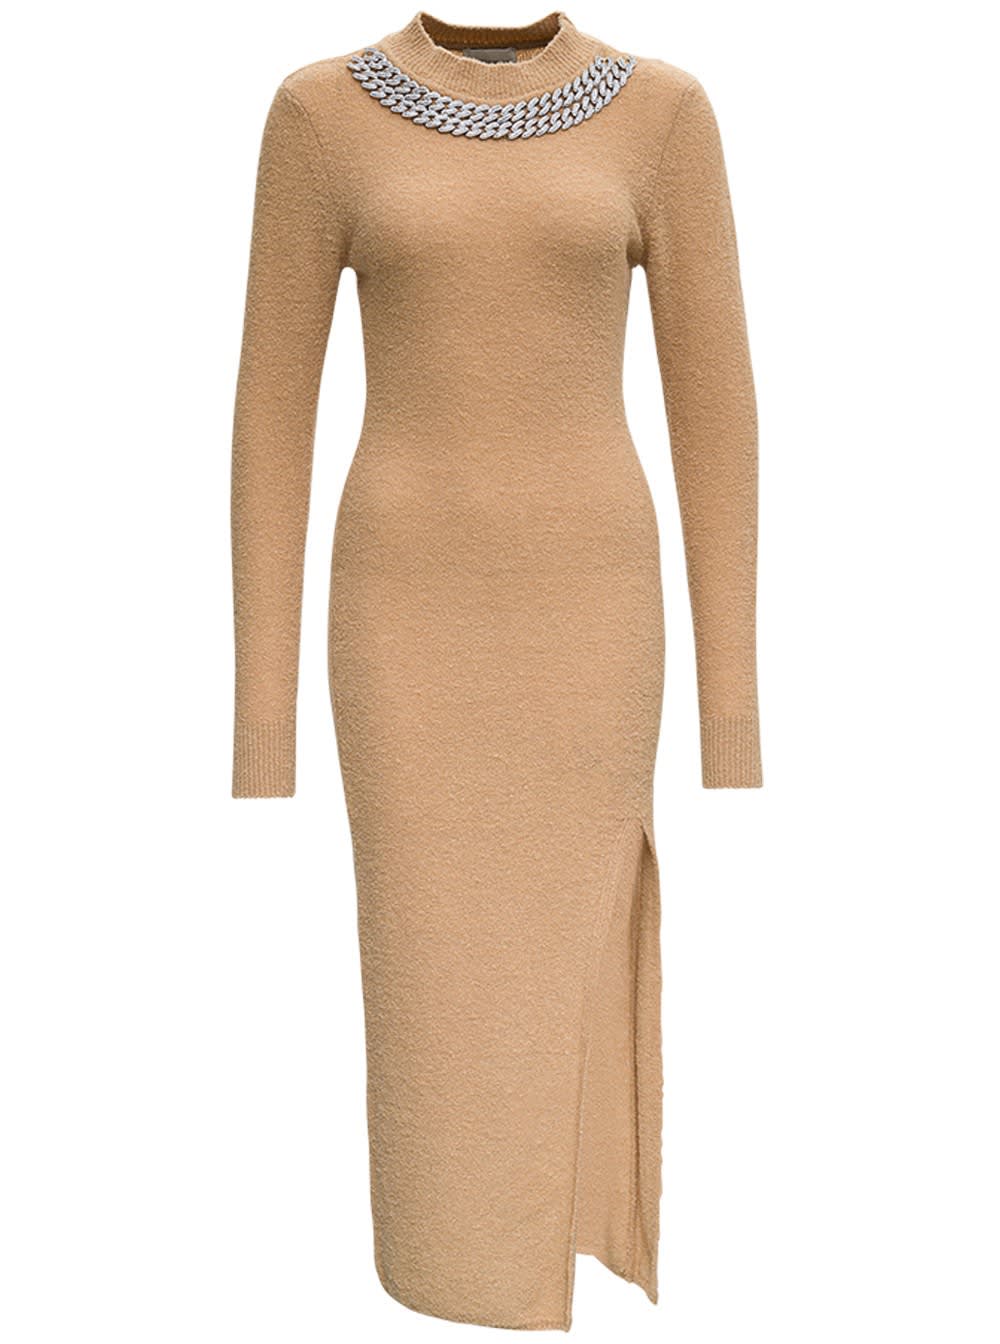 Giuseppe di Morabito Long Beige Wool Blend Dress With Chain Detail